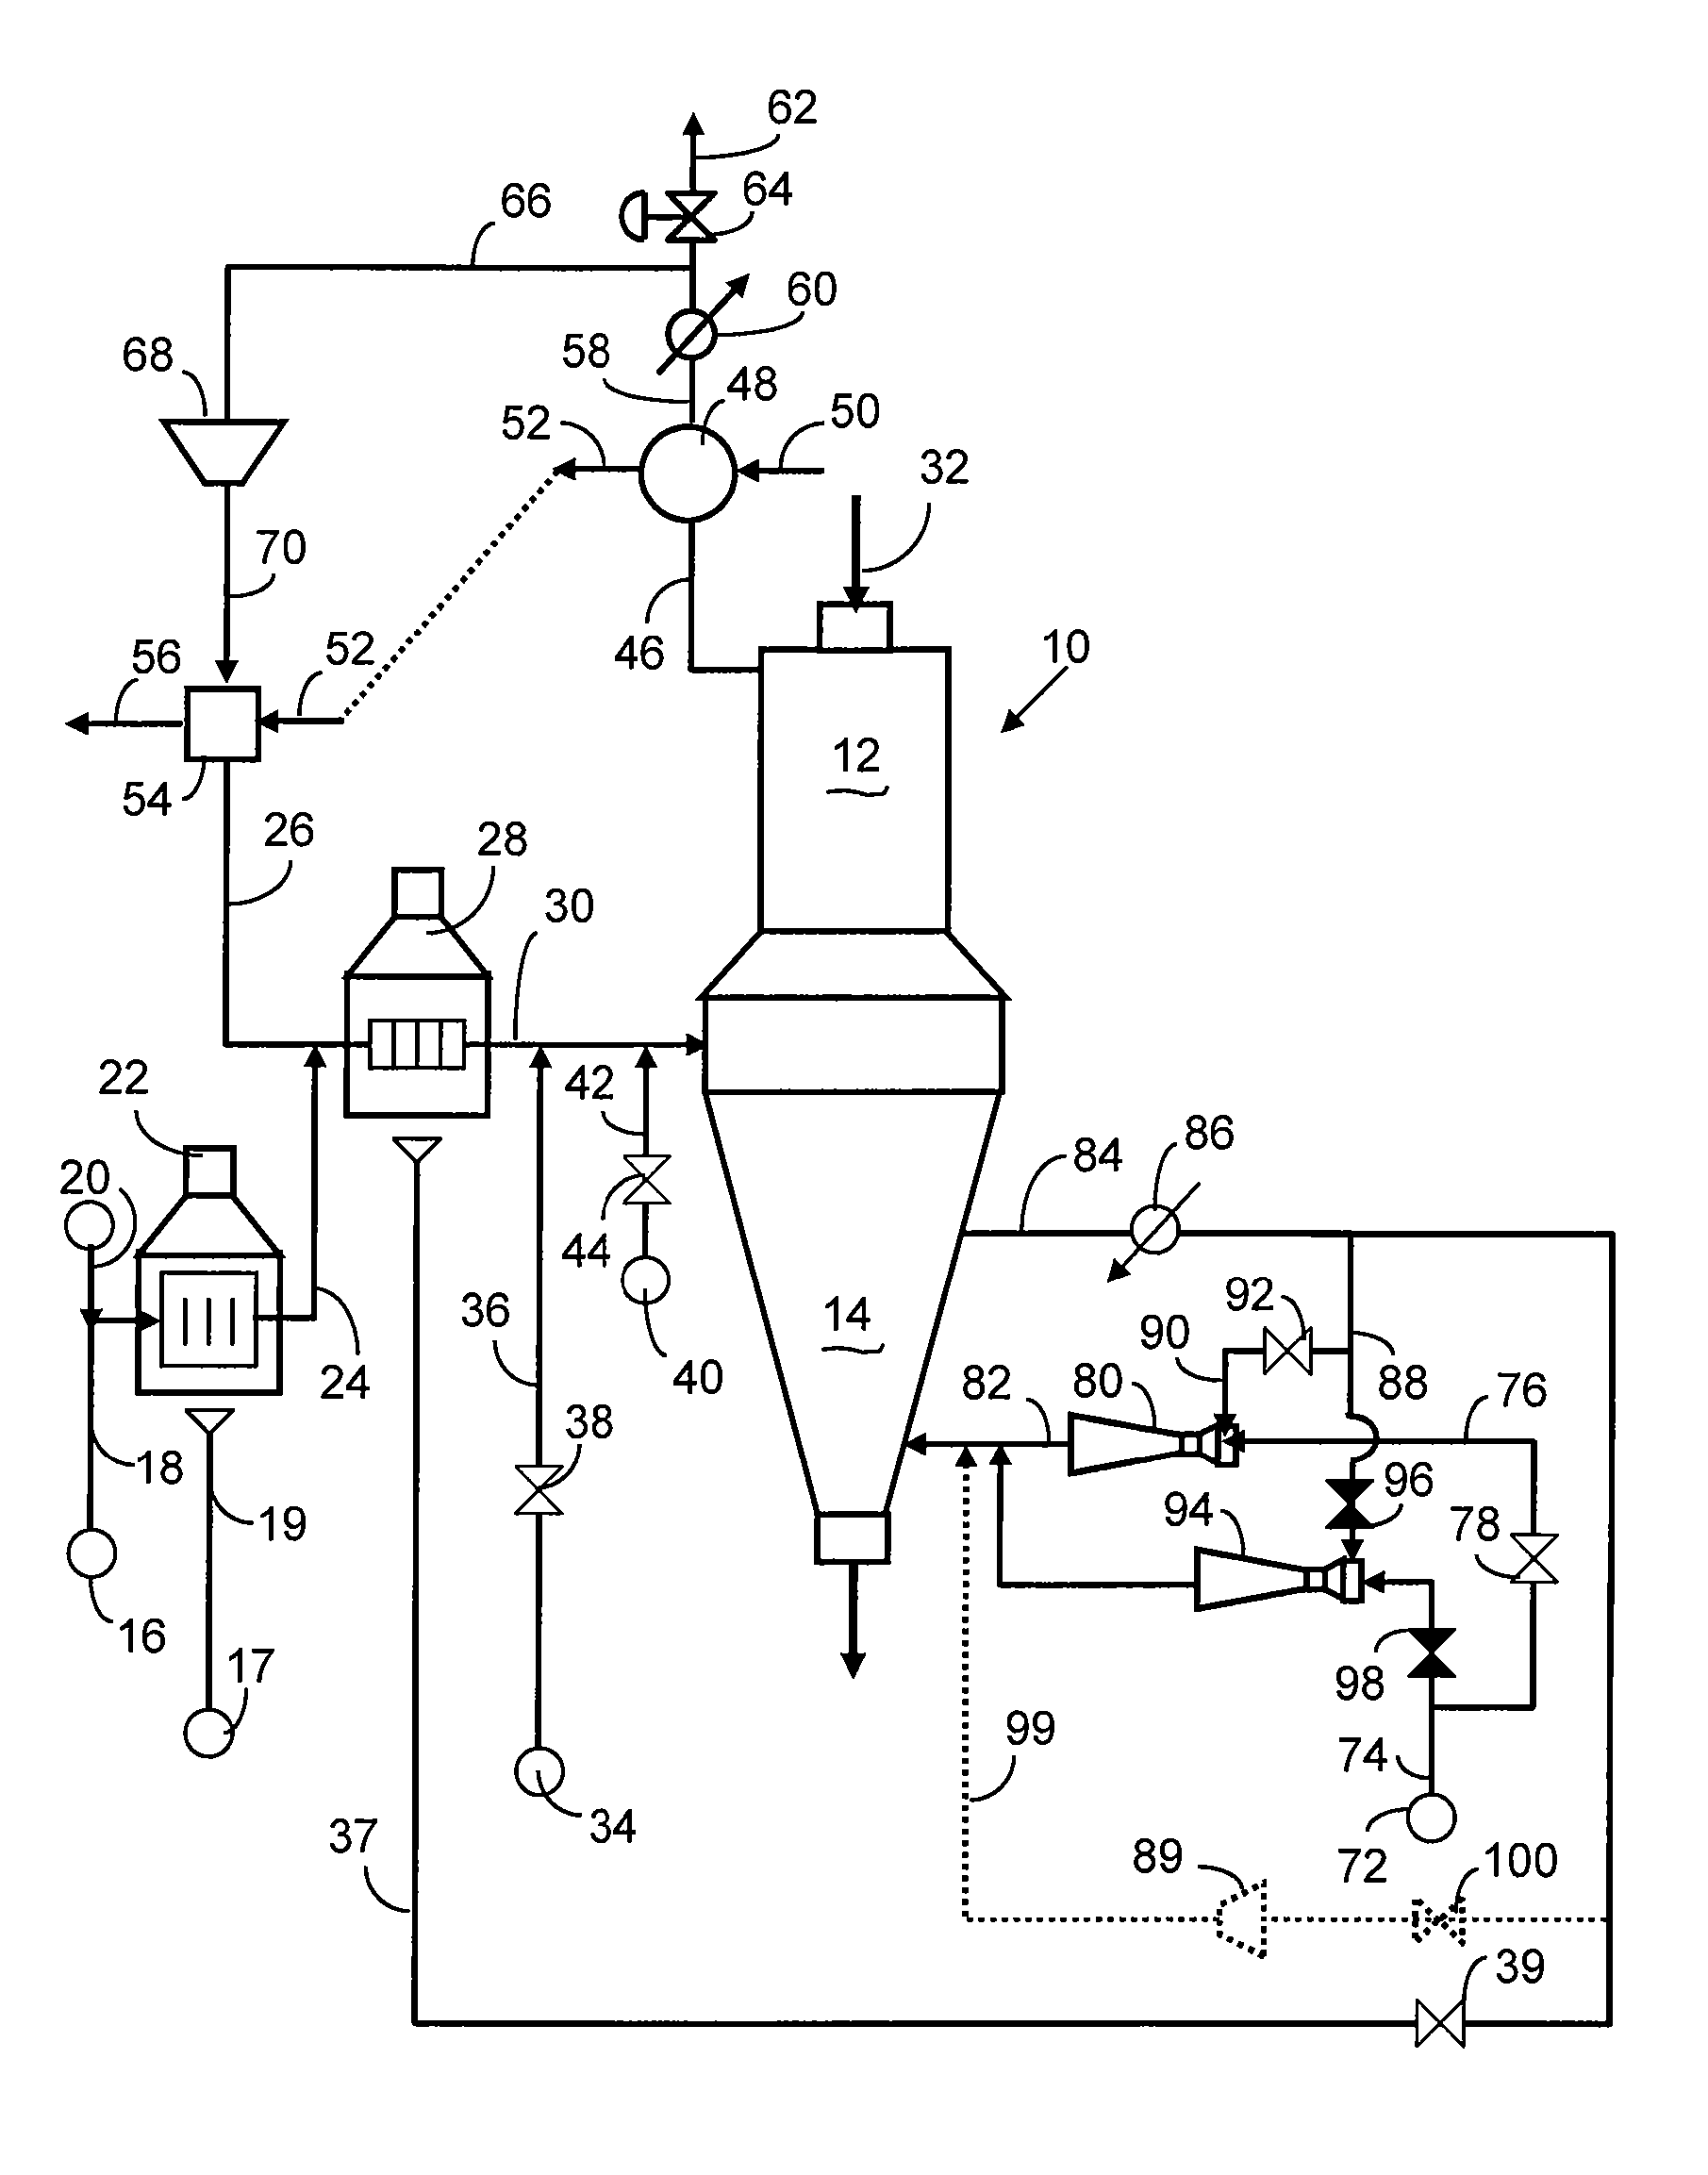 Method and Apparatus for Producing Direct Reduced Iron